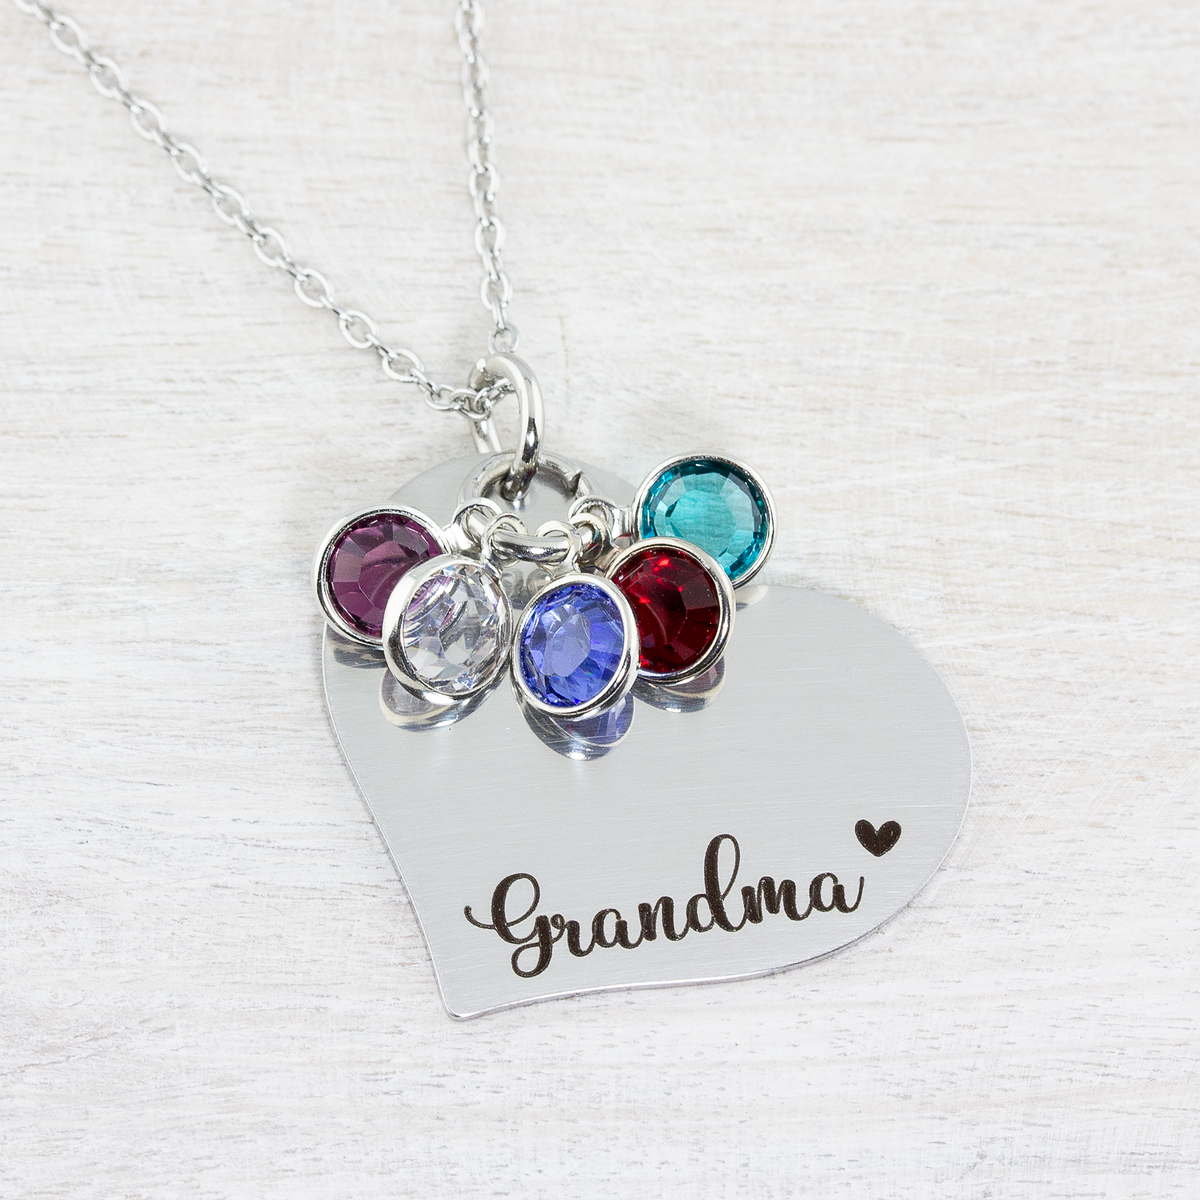 Birthstone Necklace for Grandma - 10 Personalized Necklaces with Grandkids'  Birthstones | Necklace with kids names, Family tree necklace birthstones,  Family tree necklace